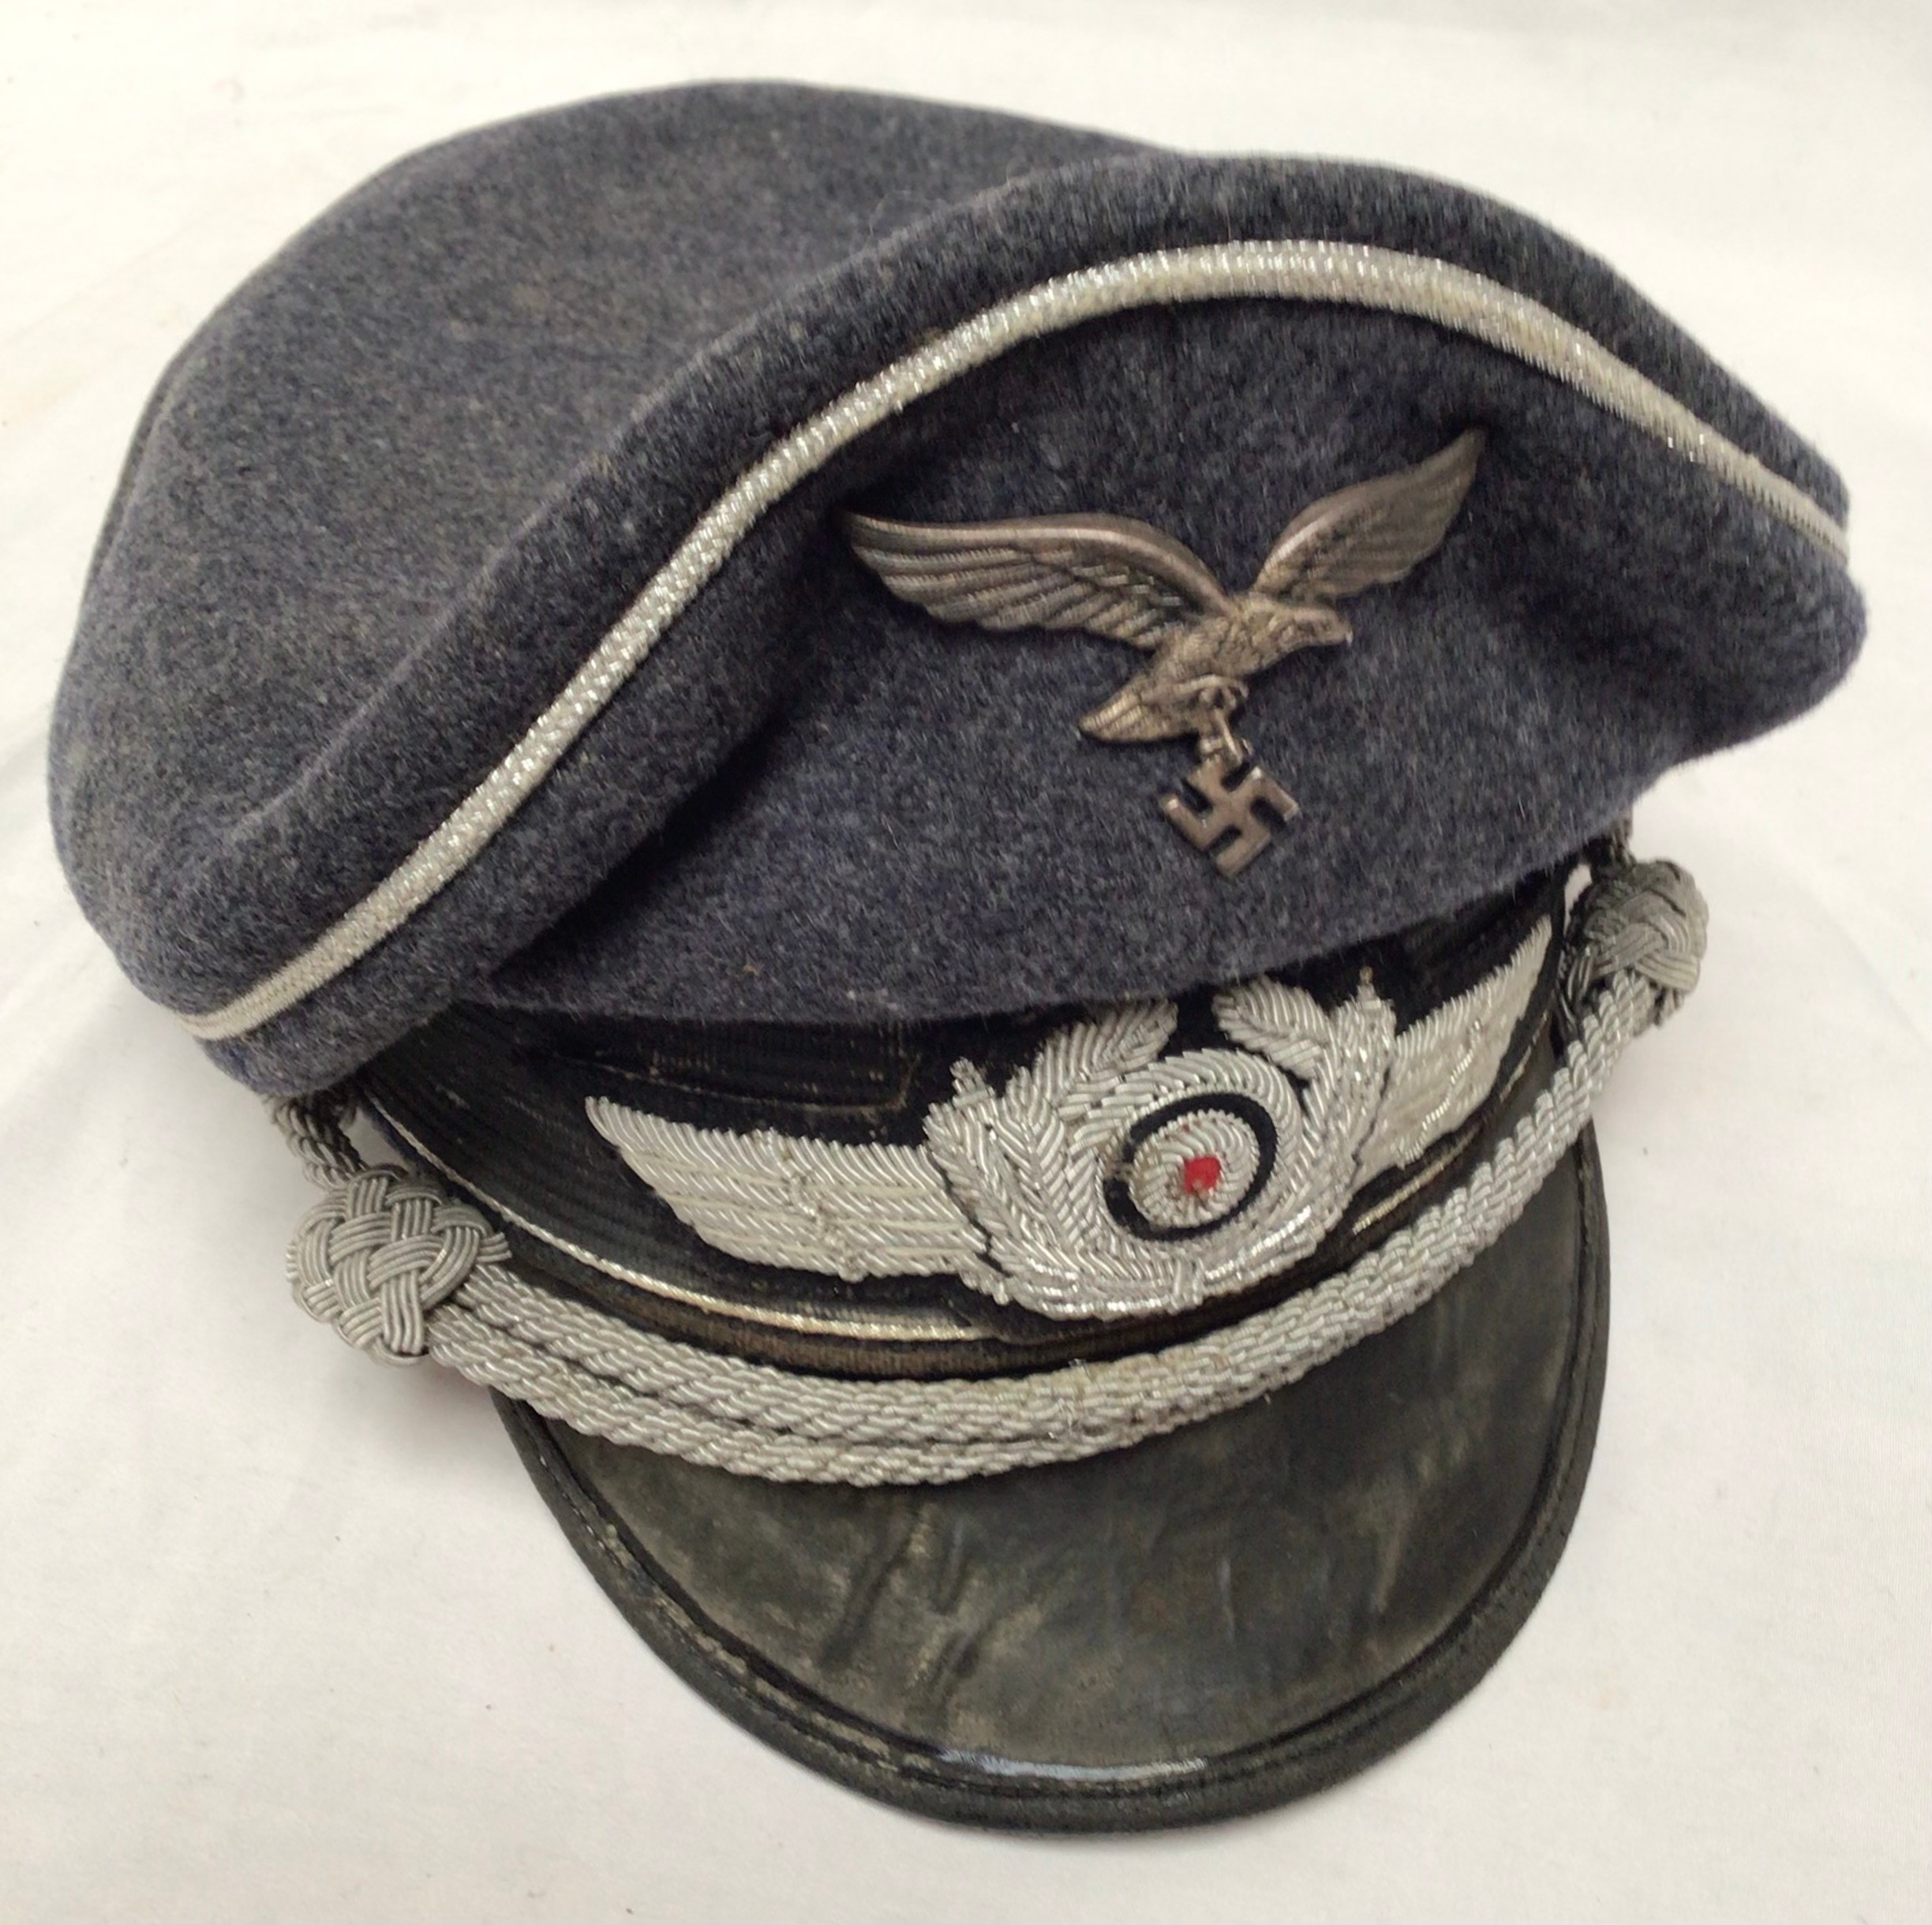 A German WWII Third Reich Luftwaffe side cap, together with a reproduction German WWII Third Reich